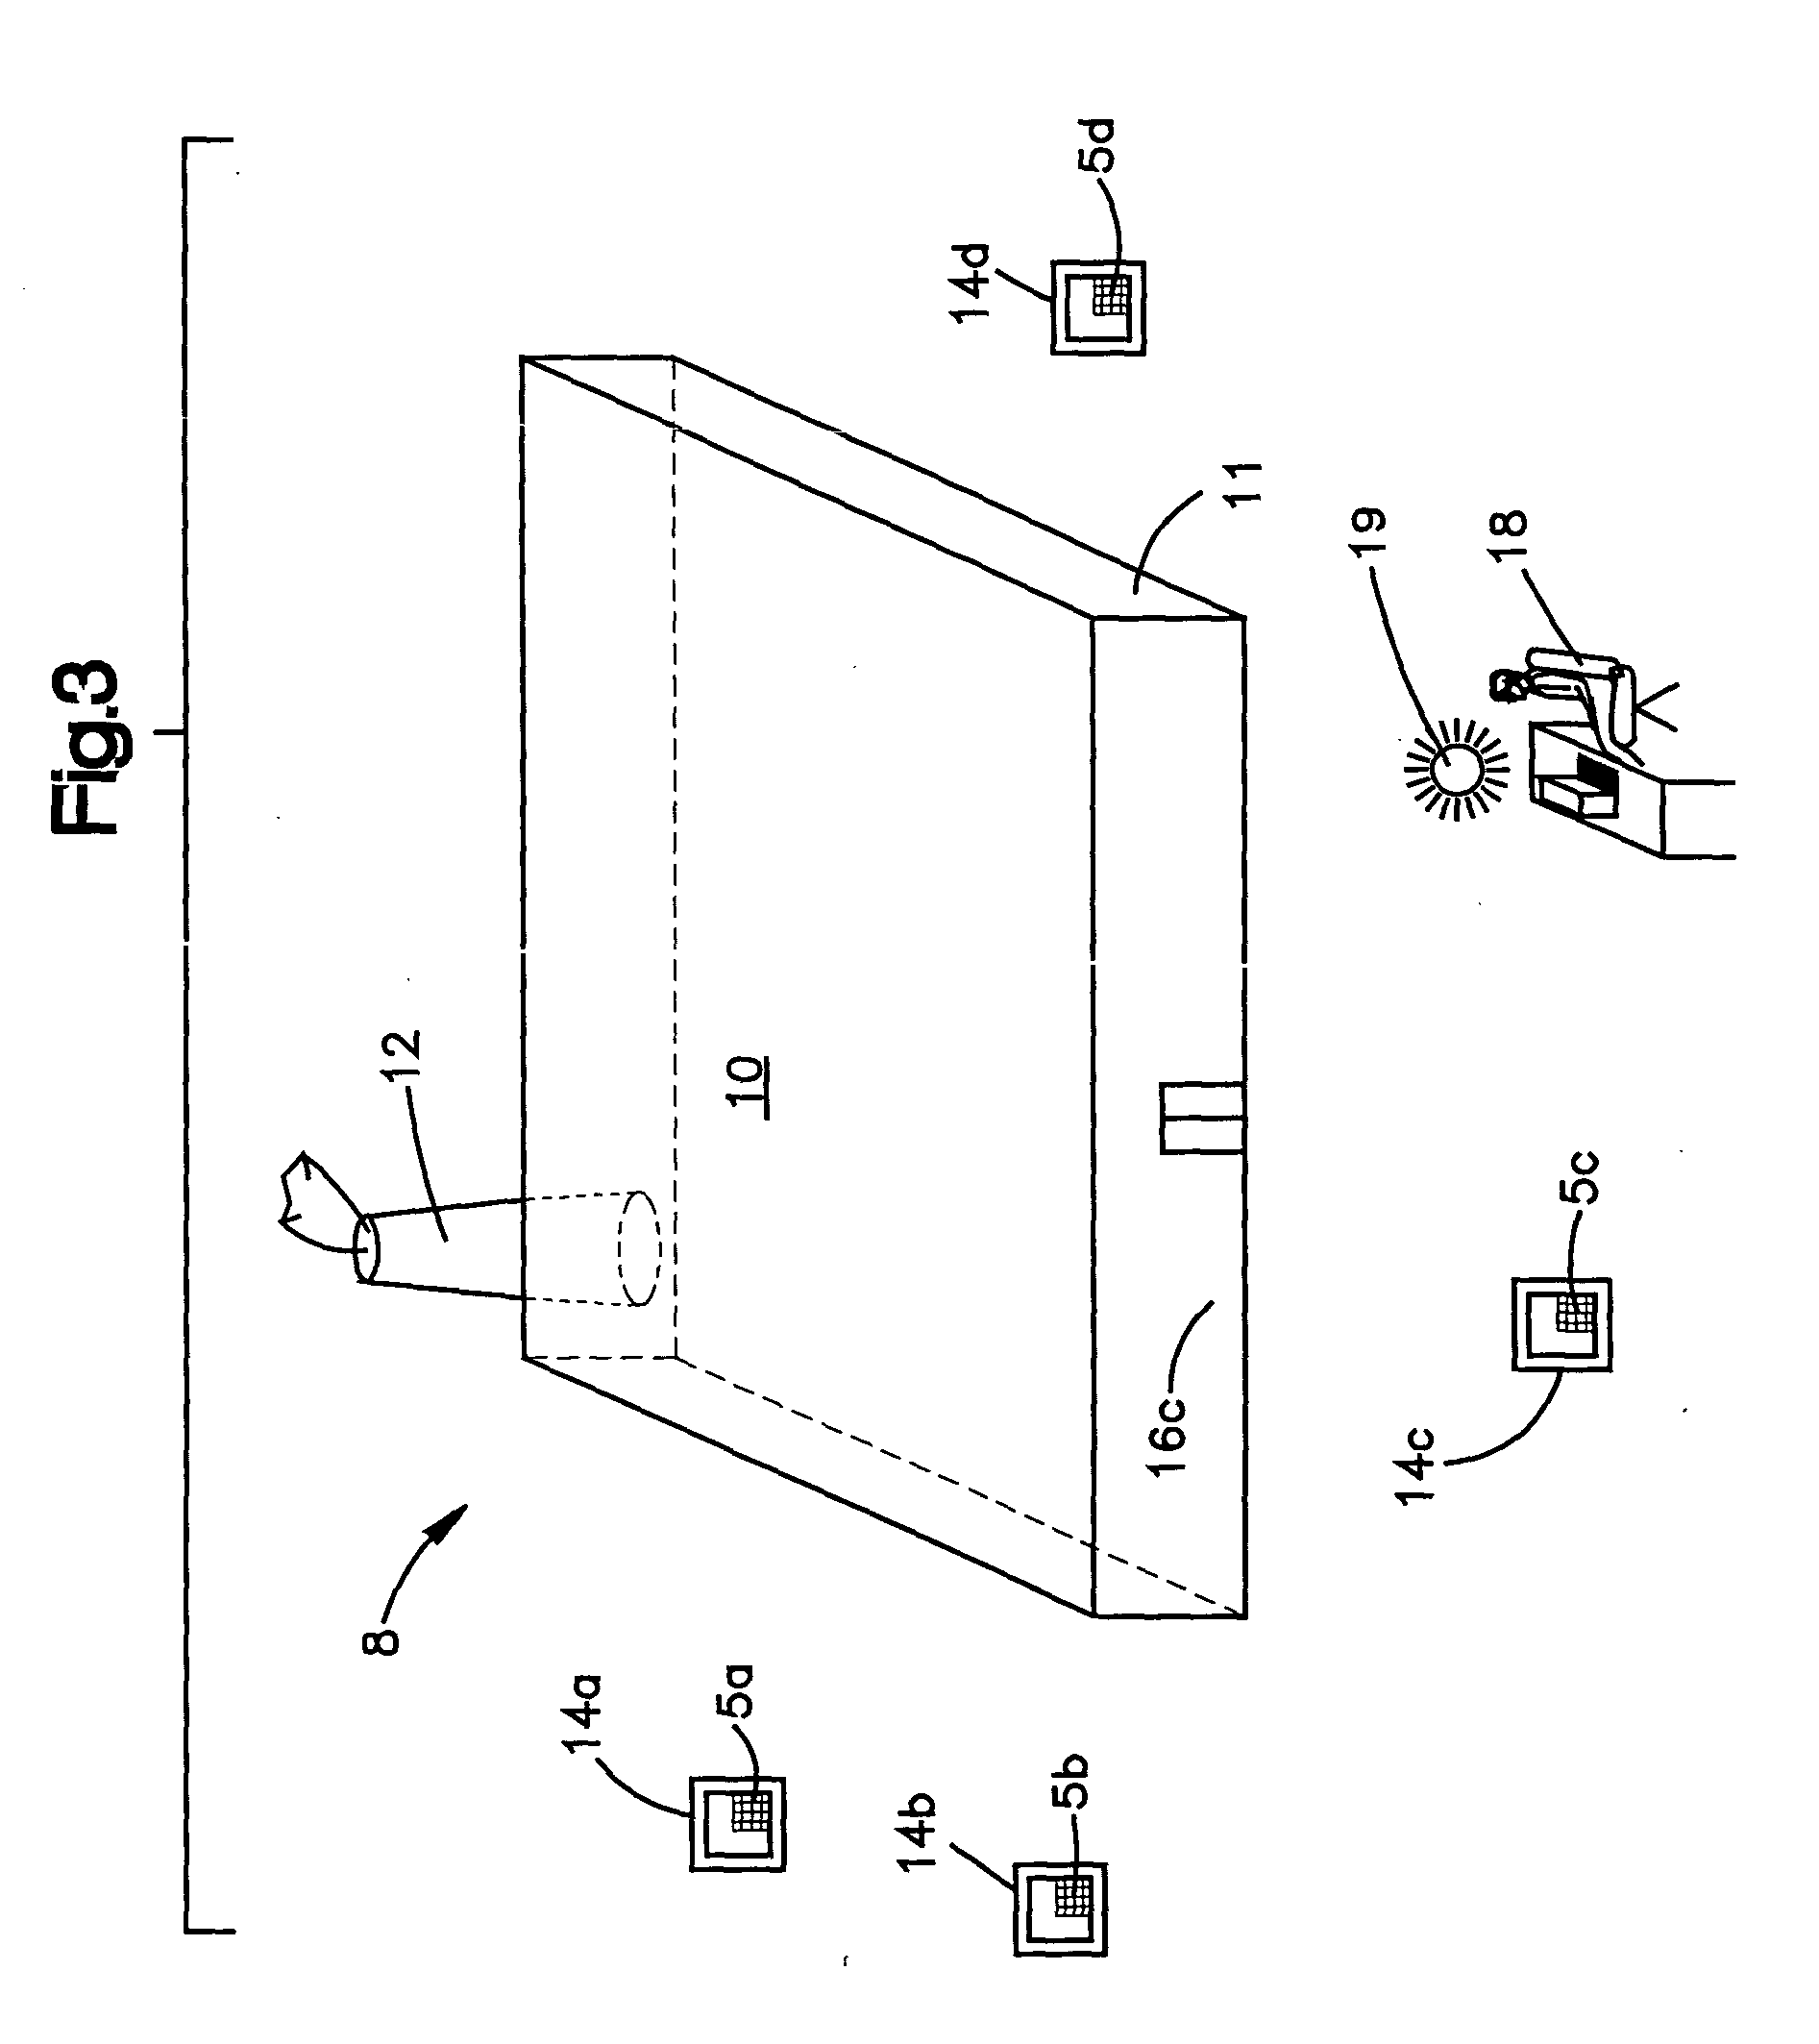 Apparatus and method for wireless gas monitoring